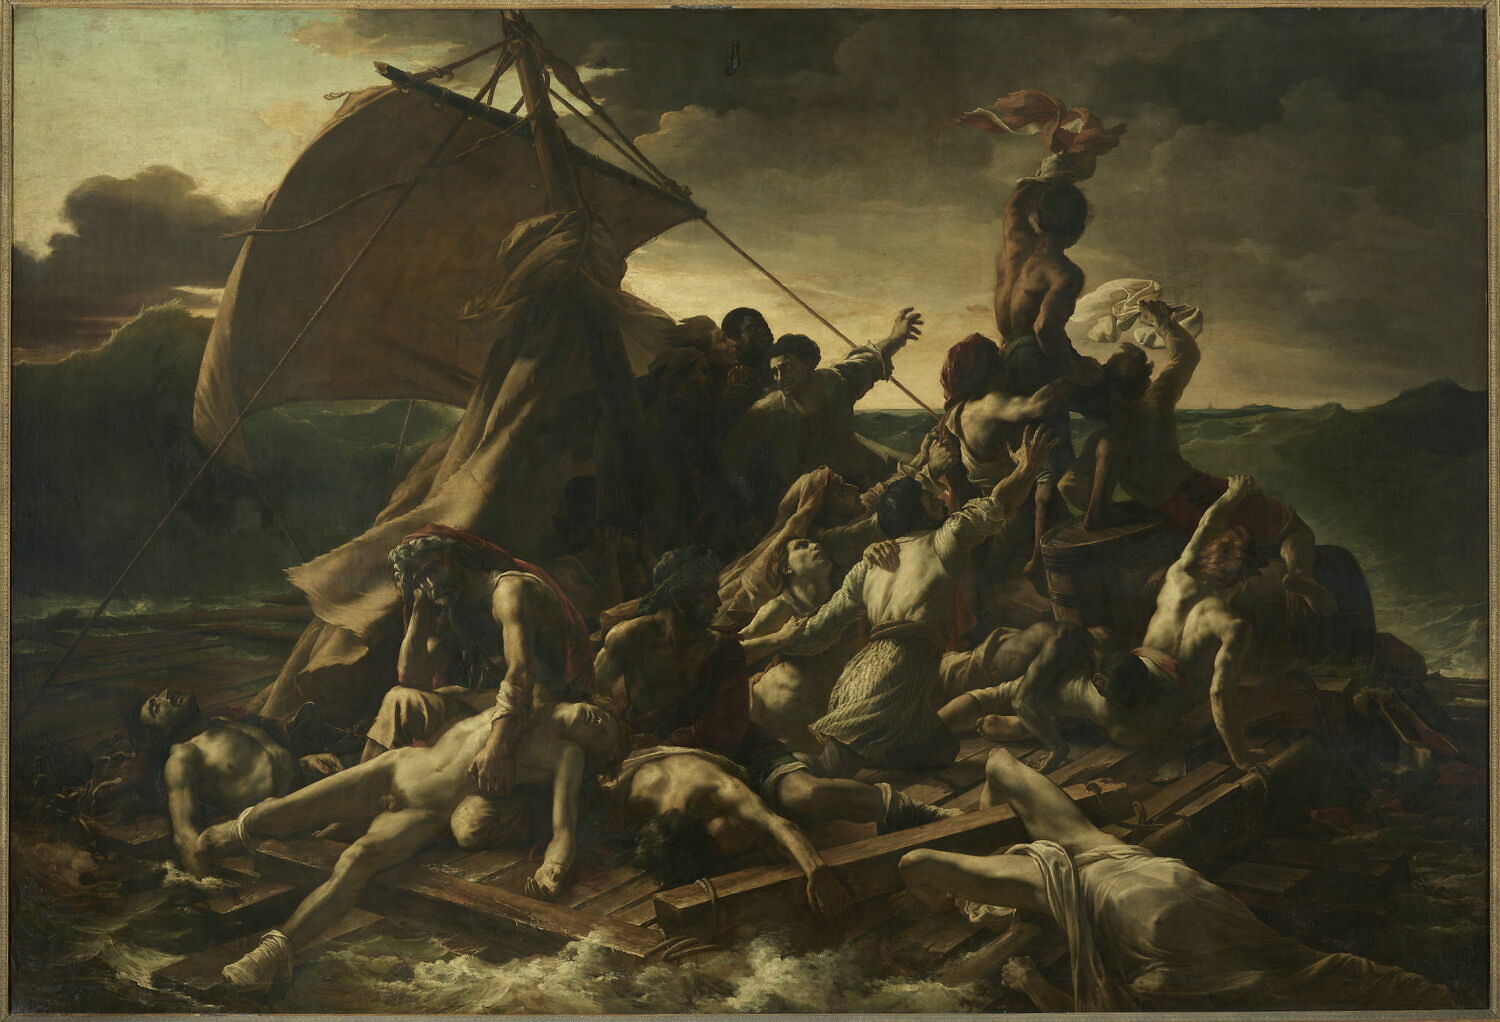 A romantic era painting depicting a shipwrecked crew on top of a raft.